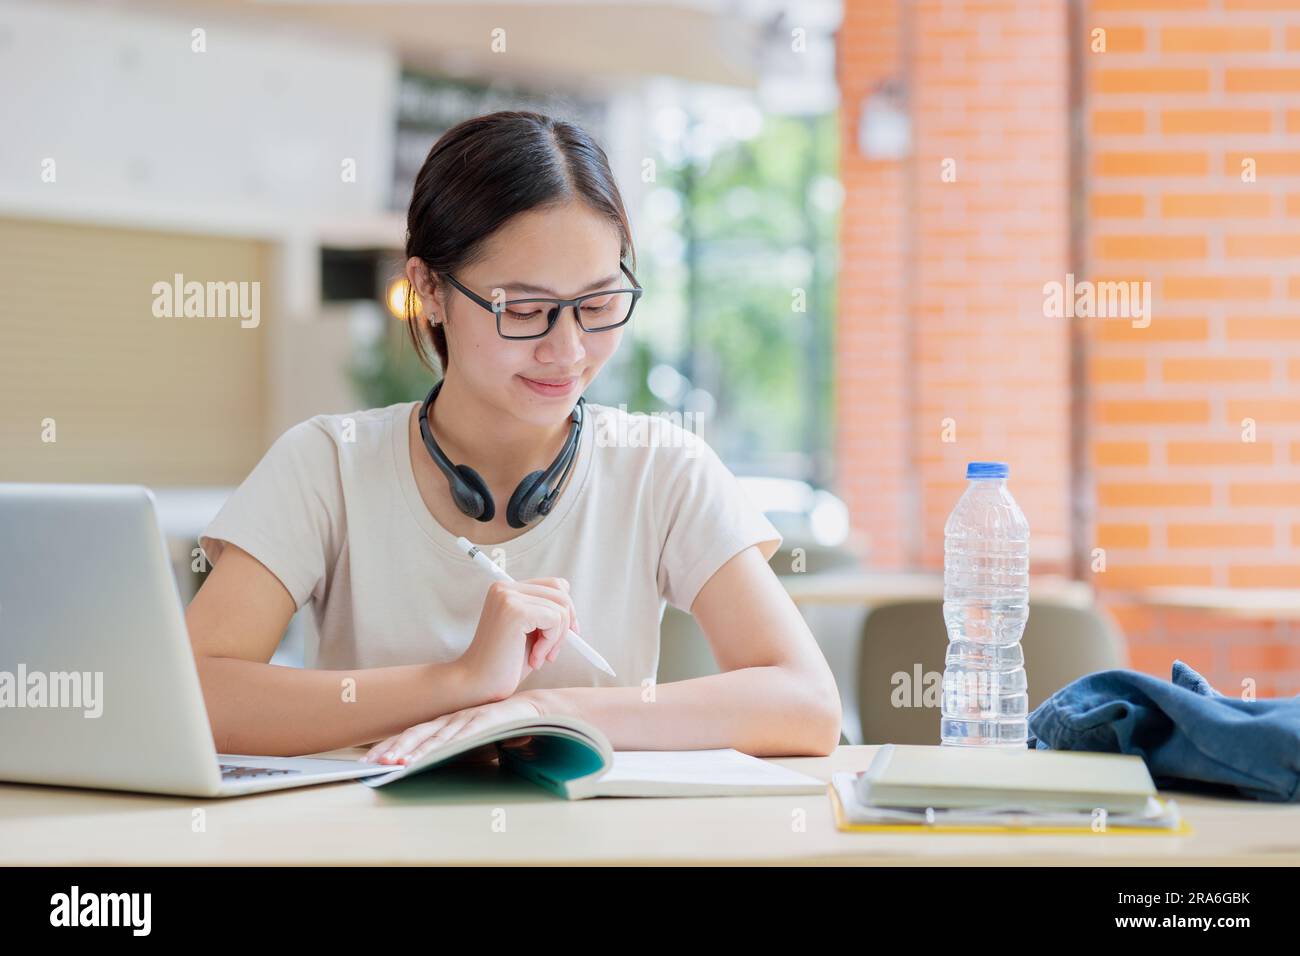 Asian university teen woman review reading a book education learning smart student lifestyle. Stock Photo